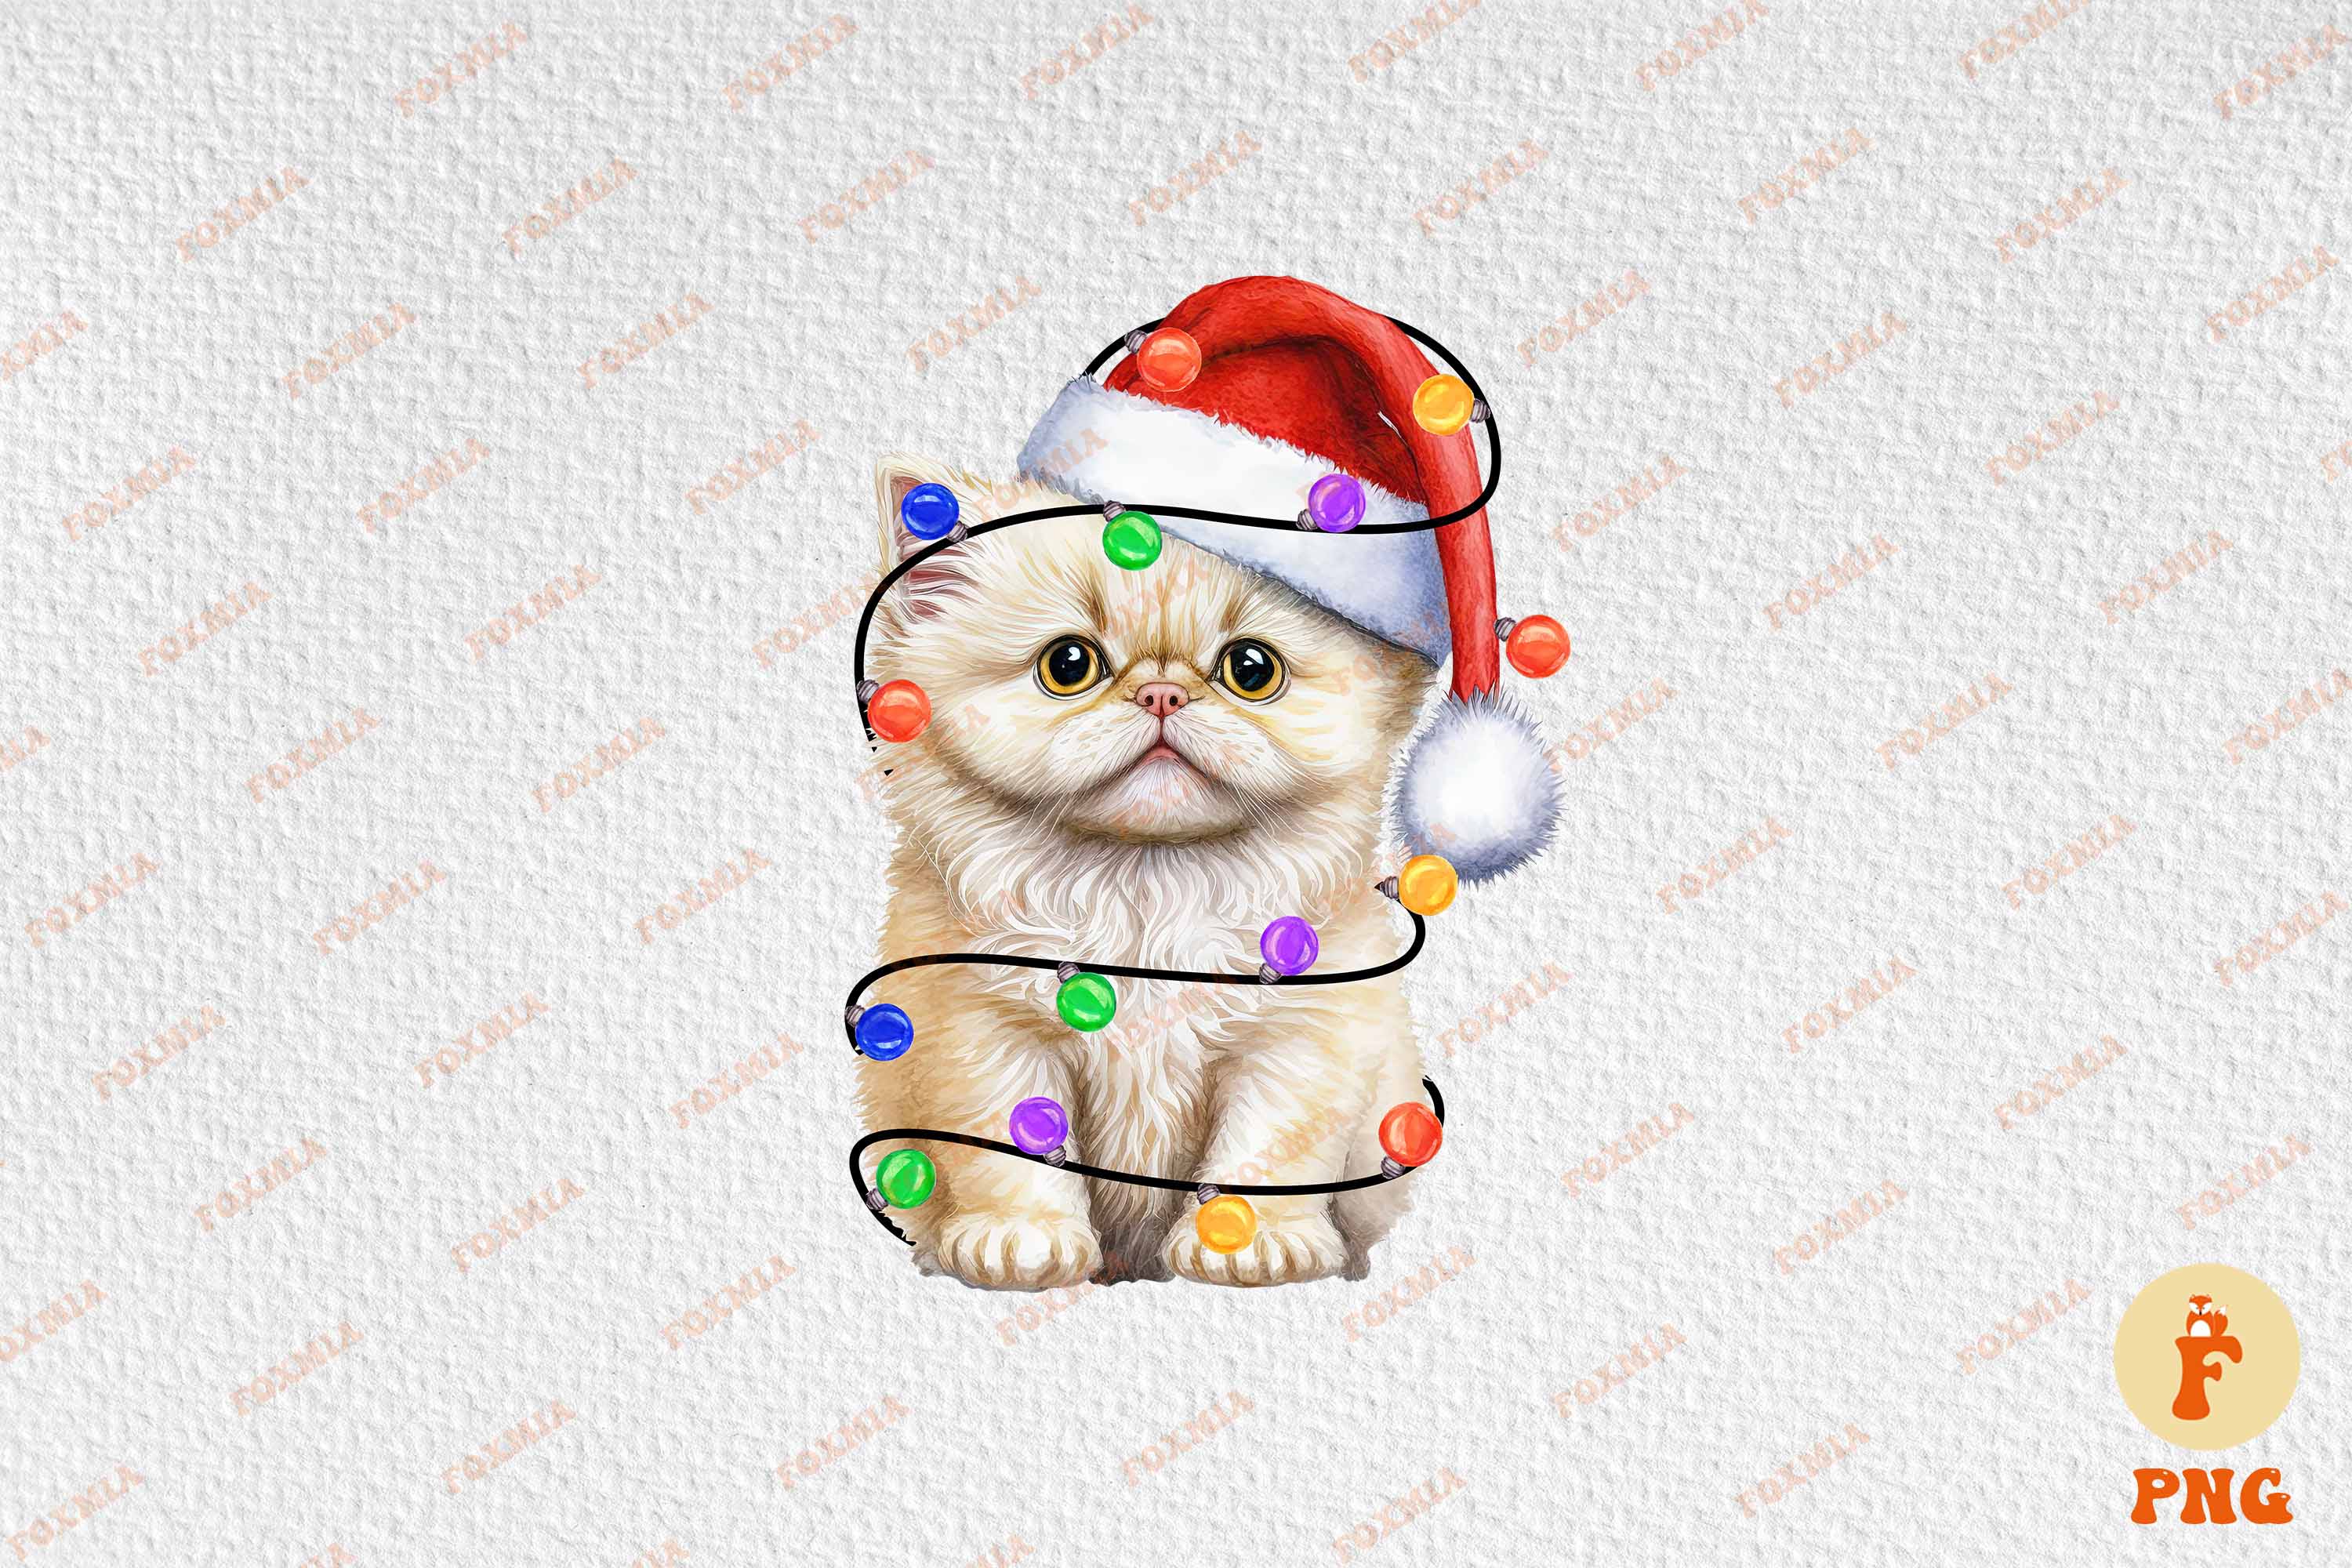 Adorable image of a cat in a santa hat.